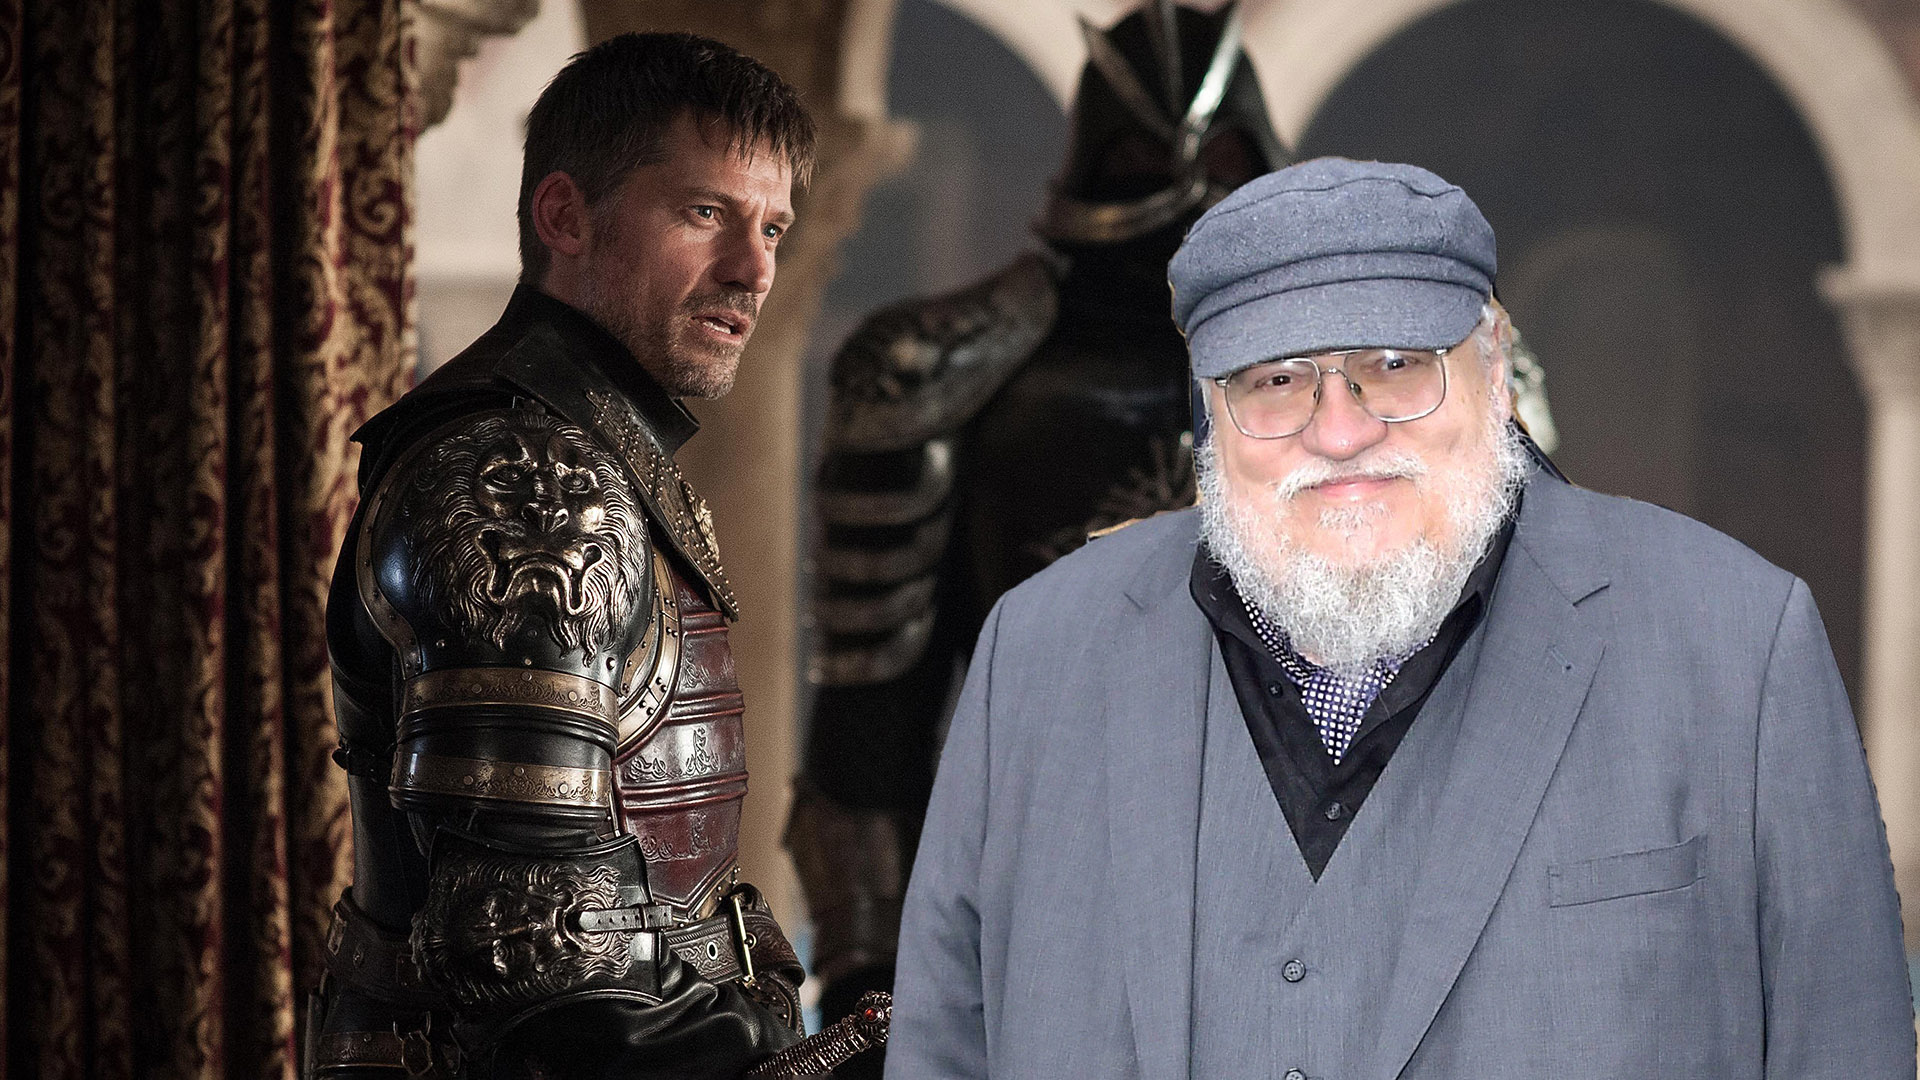 Latest Update on George R. R. Martin's 'The Winds of Winter': What's New in the World of Westeros?